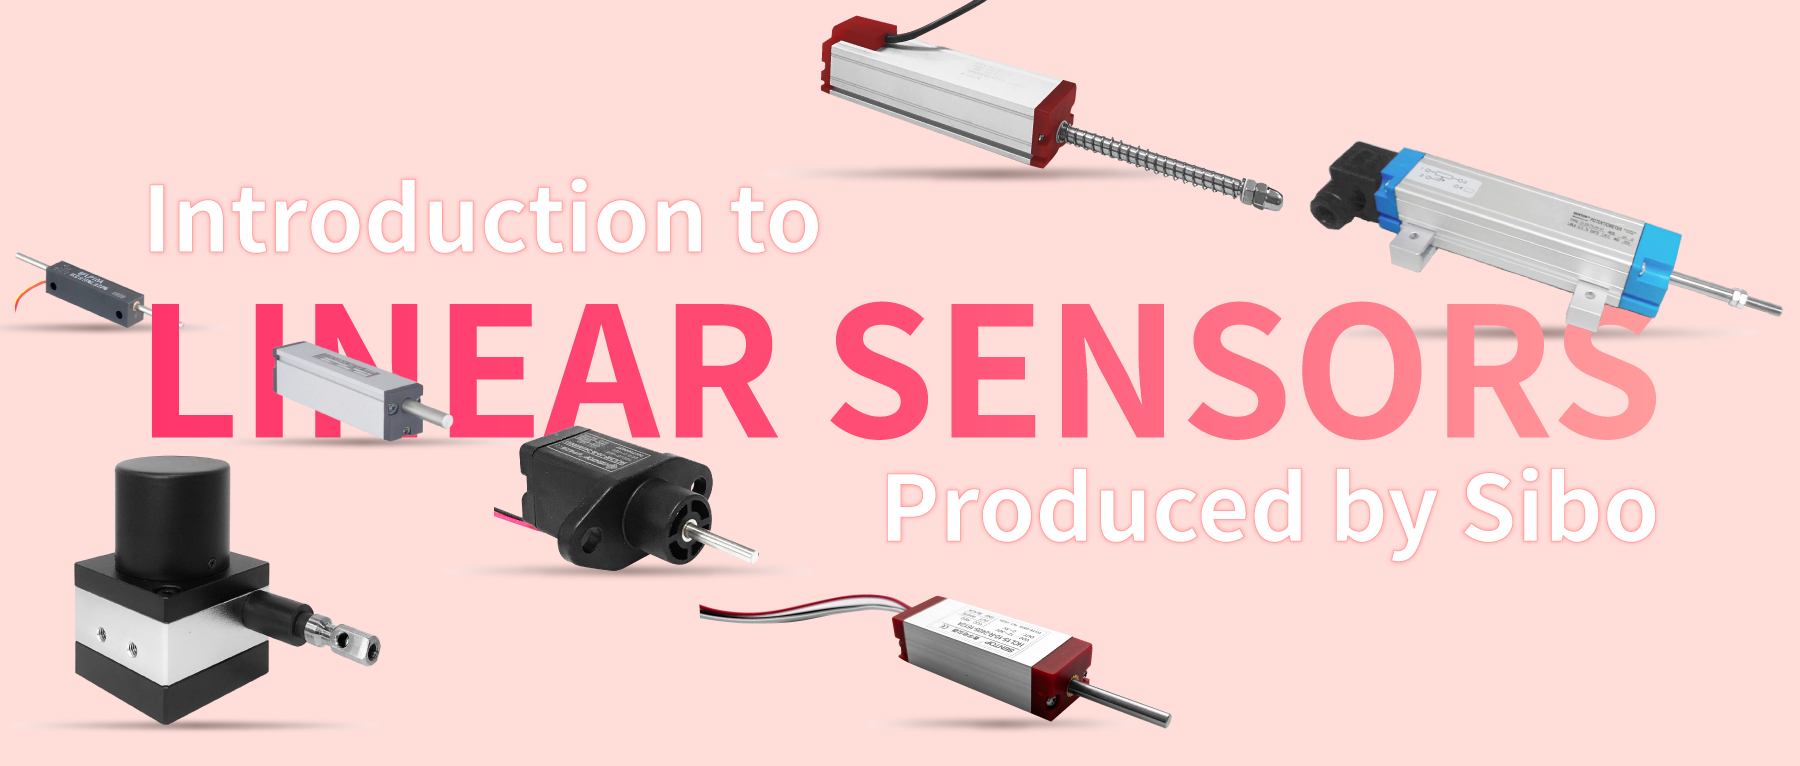 Introduction to linear sensors